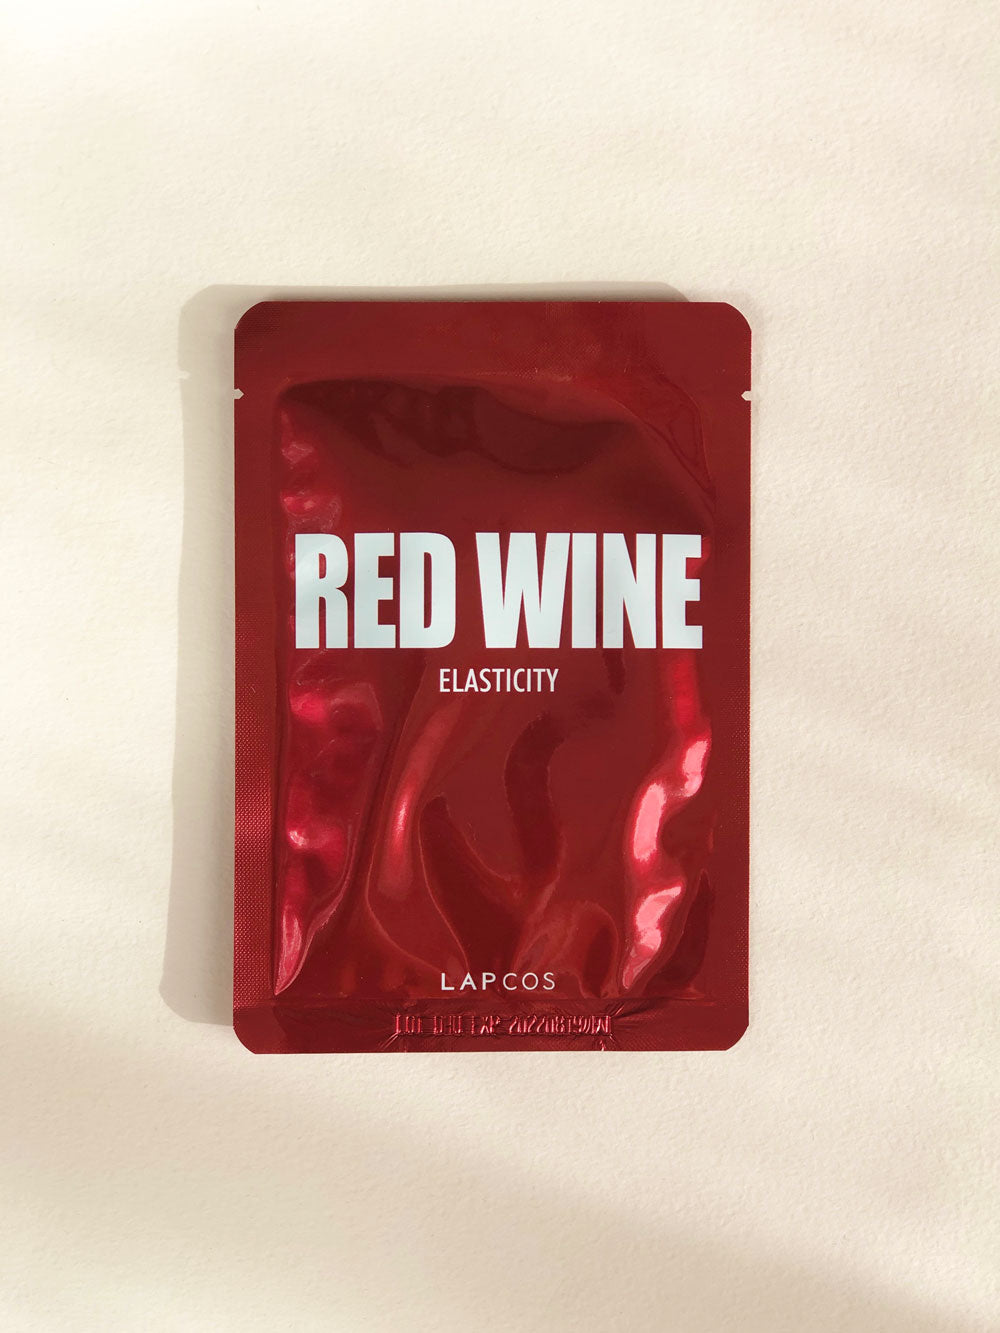 Red Wine sheet mask to brighten, smooth and hydrate skin. By Lapcos